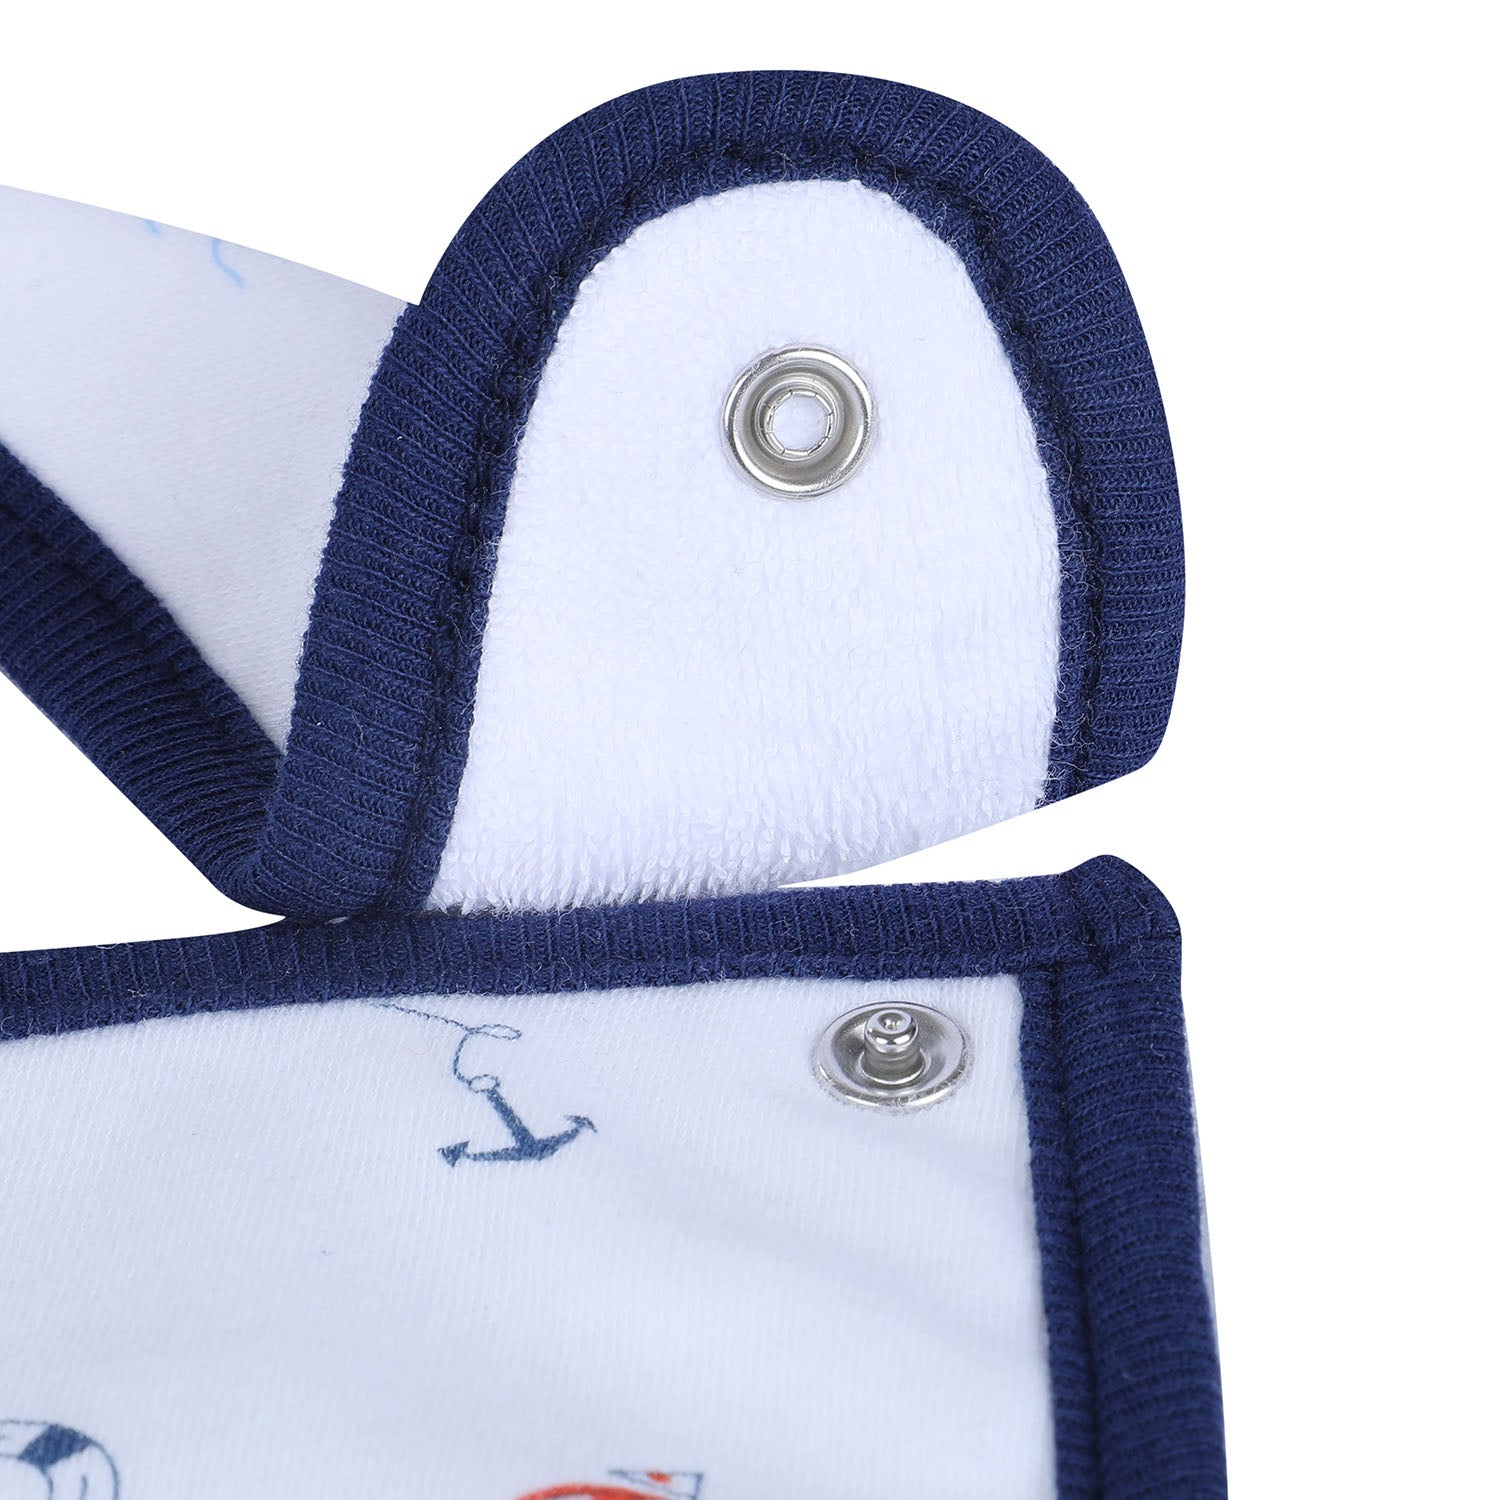 Baby Moo Daddy's Sailor Cotton 2 Pack Buttoned Feeding Bibs - Red - Baby Moo